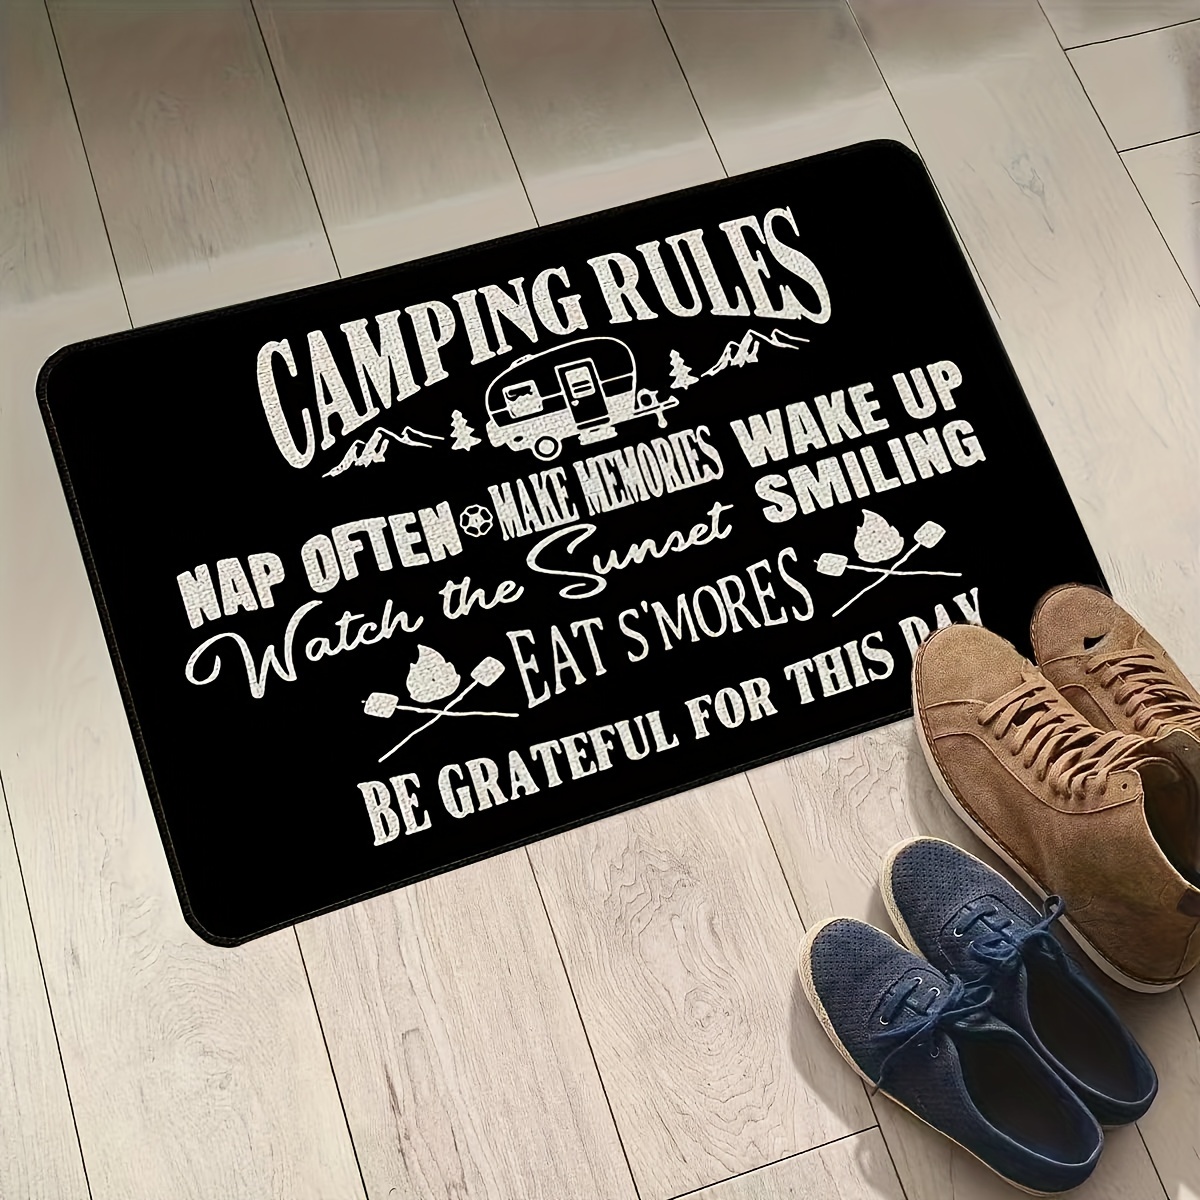 Making Memories At The Campsite - Personalized Decorative Mat